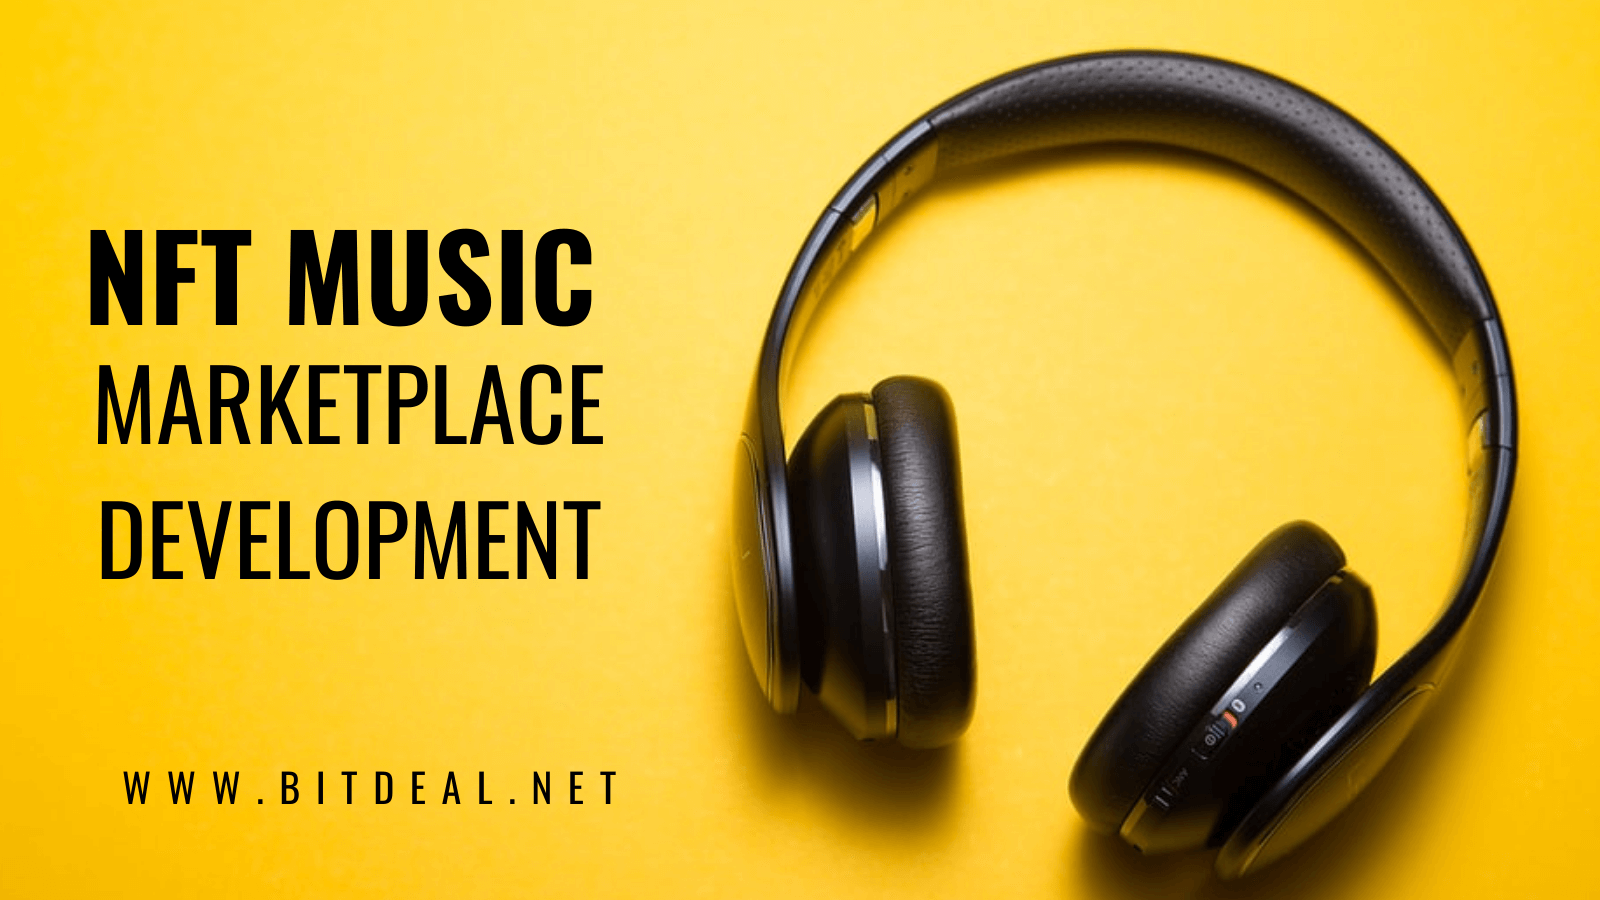 NFT Music Marketplace Development - Create Your Own NFT Marketplace For Music